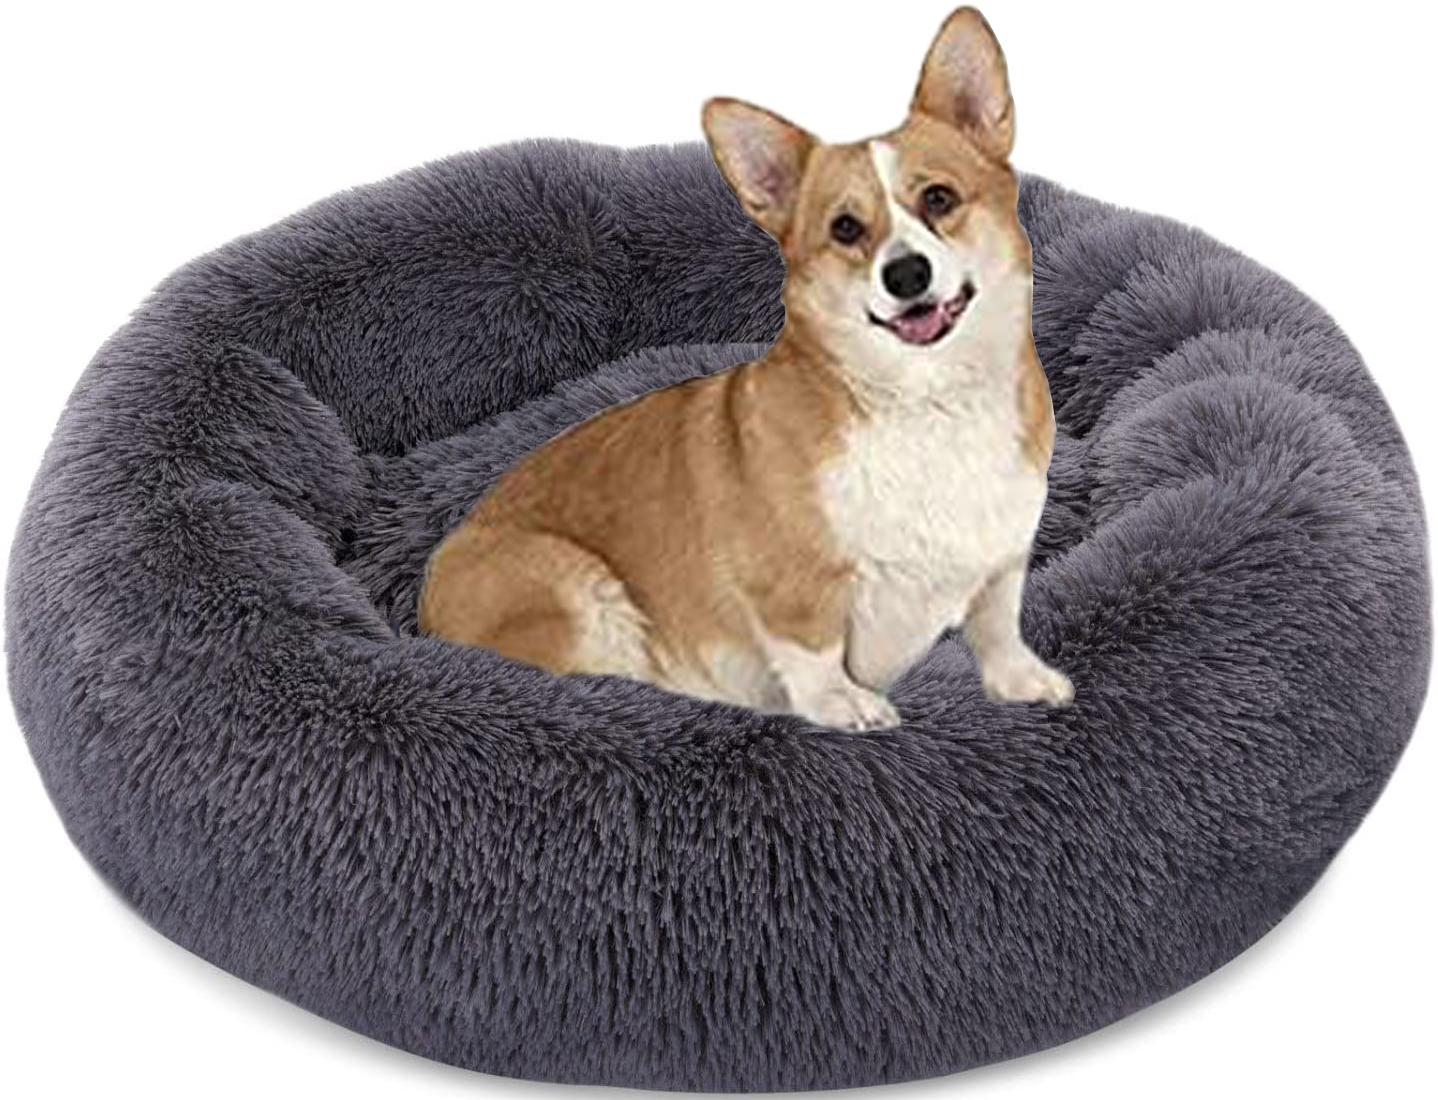 28 Inch Round Plush Pet Bed for Dogs & Cats, Fluffy Soft Warm Calming Dog Bed Cozy Faux Fur Dog Bed Sleeping Kennel Nest, Dark Grey - image 1 of 9